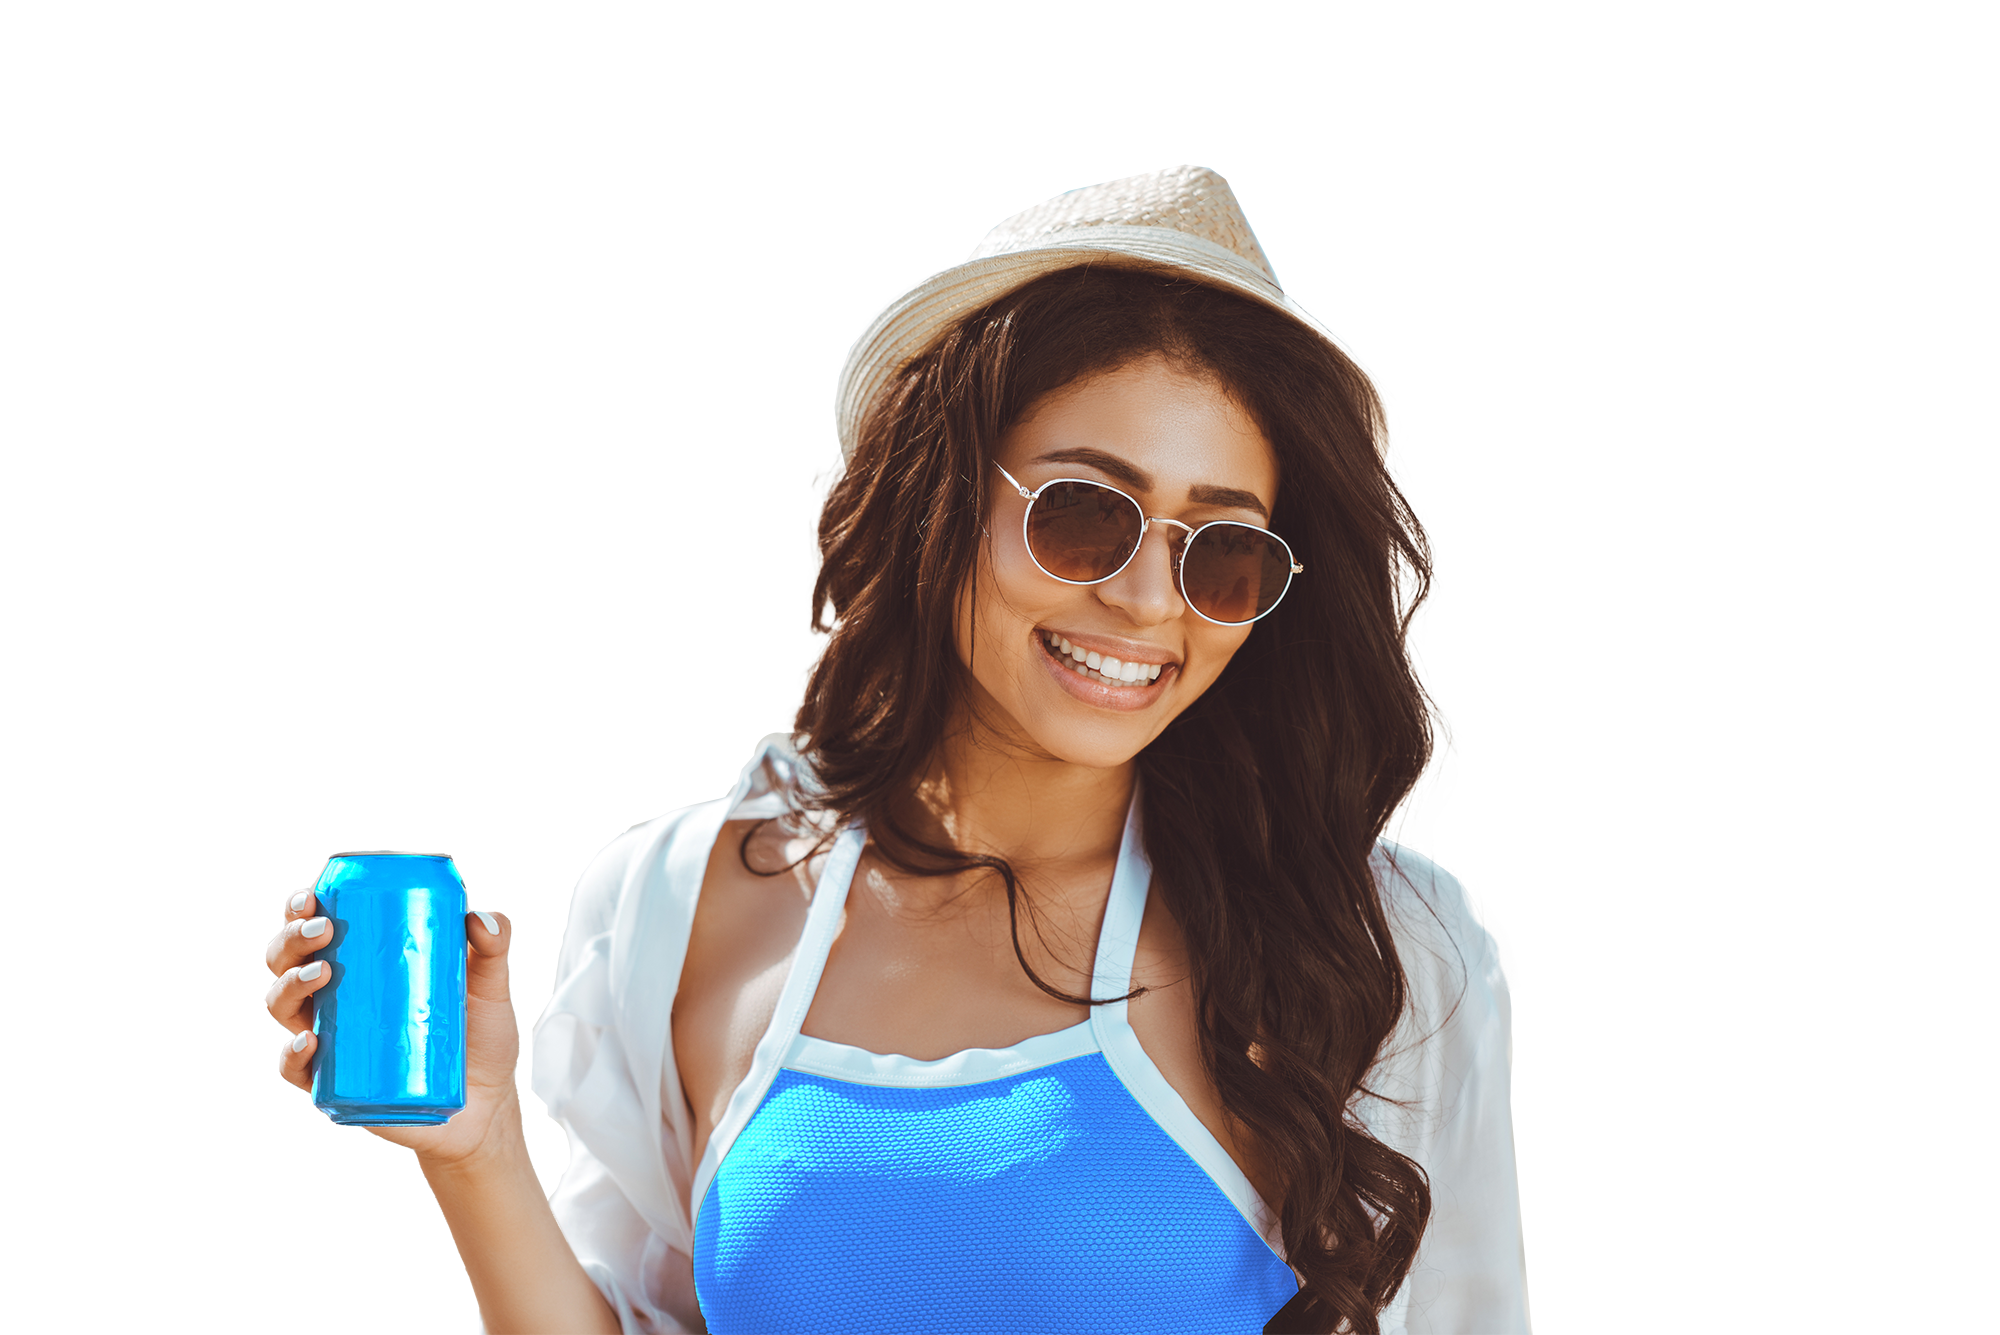 Smiling woman, who is wearing sunglasses and a straw hat, is holding a blue can.